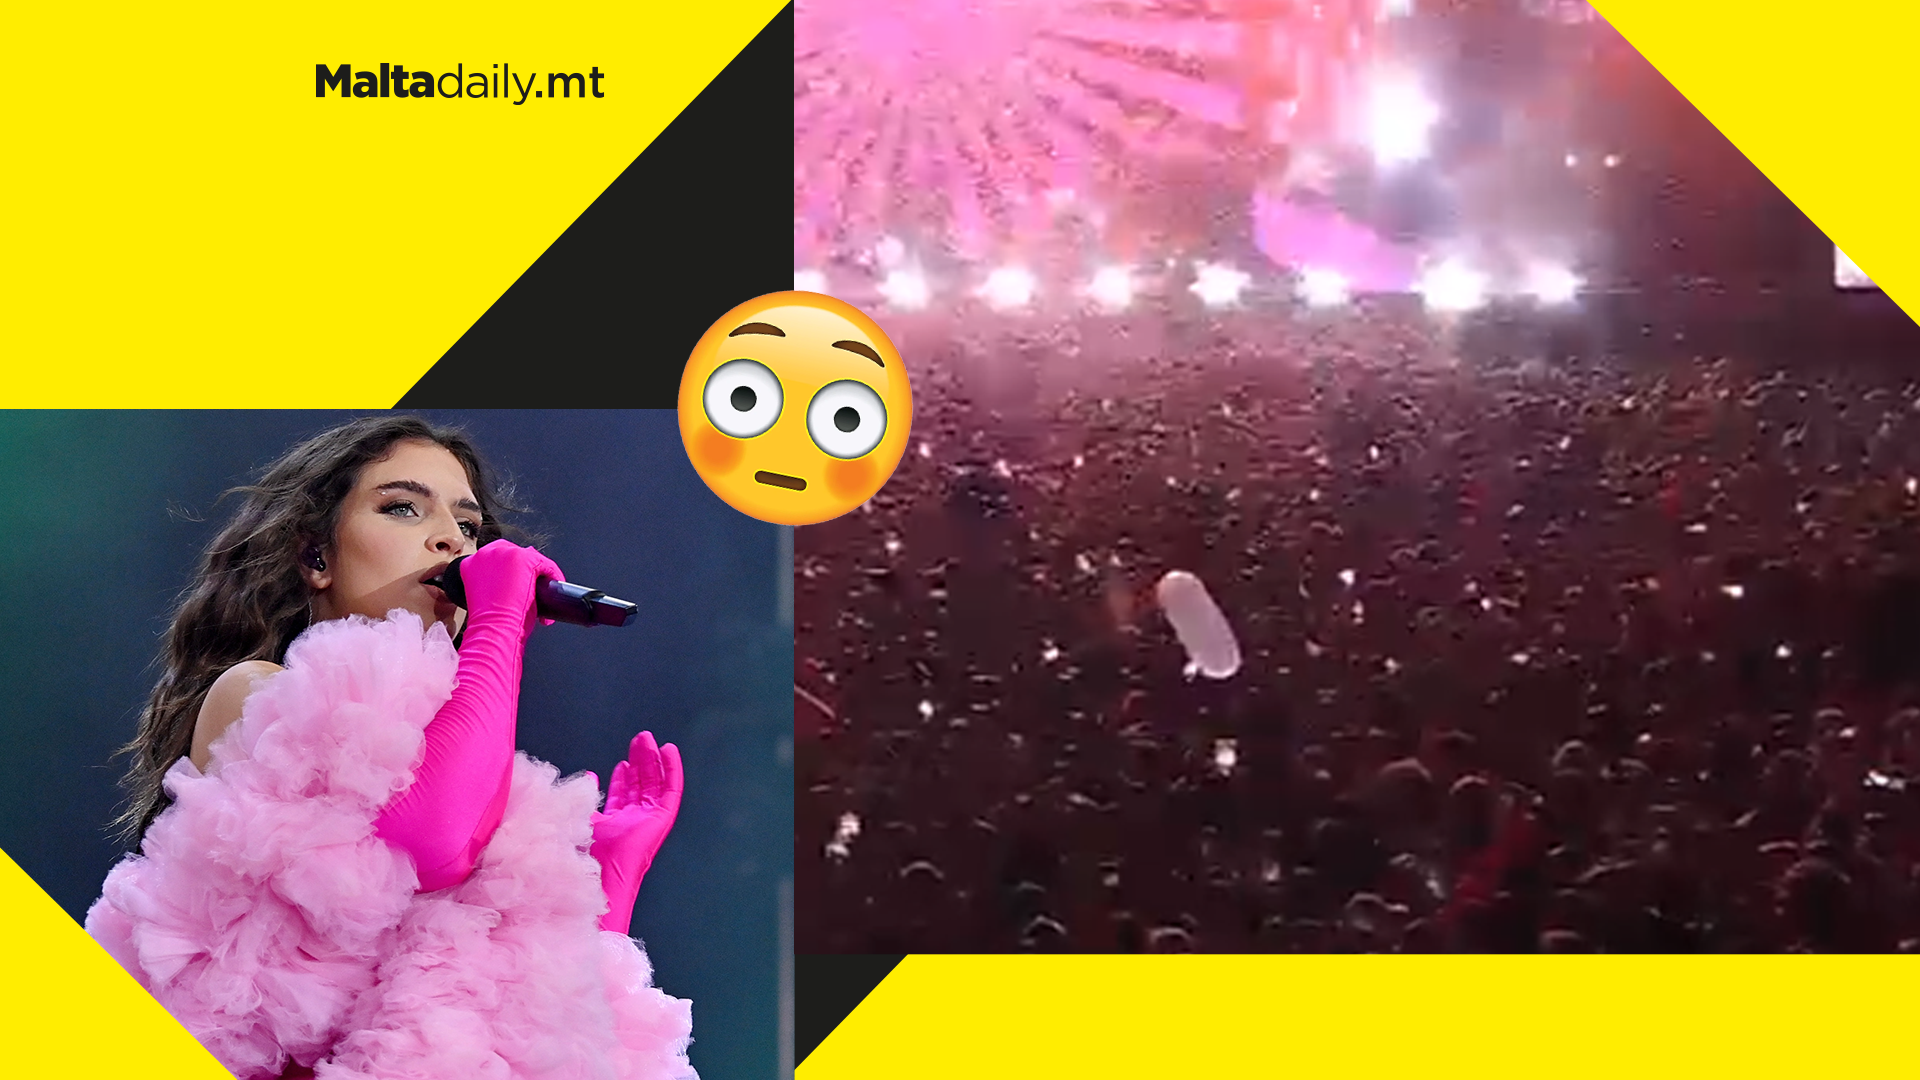 Inflated condom balloon appears in Isle of MTV crowd